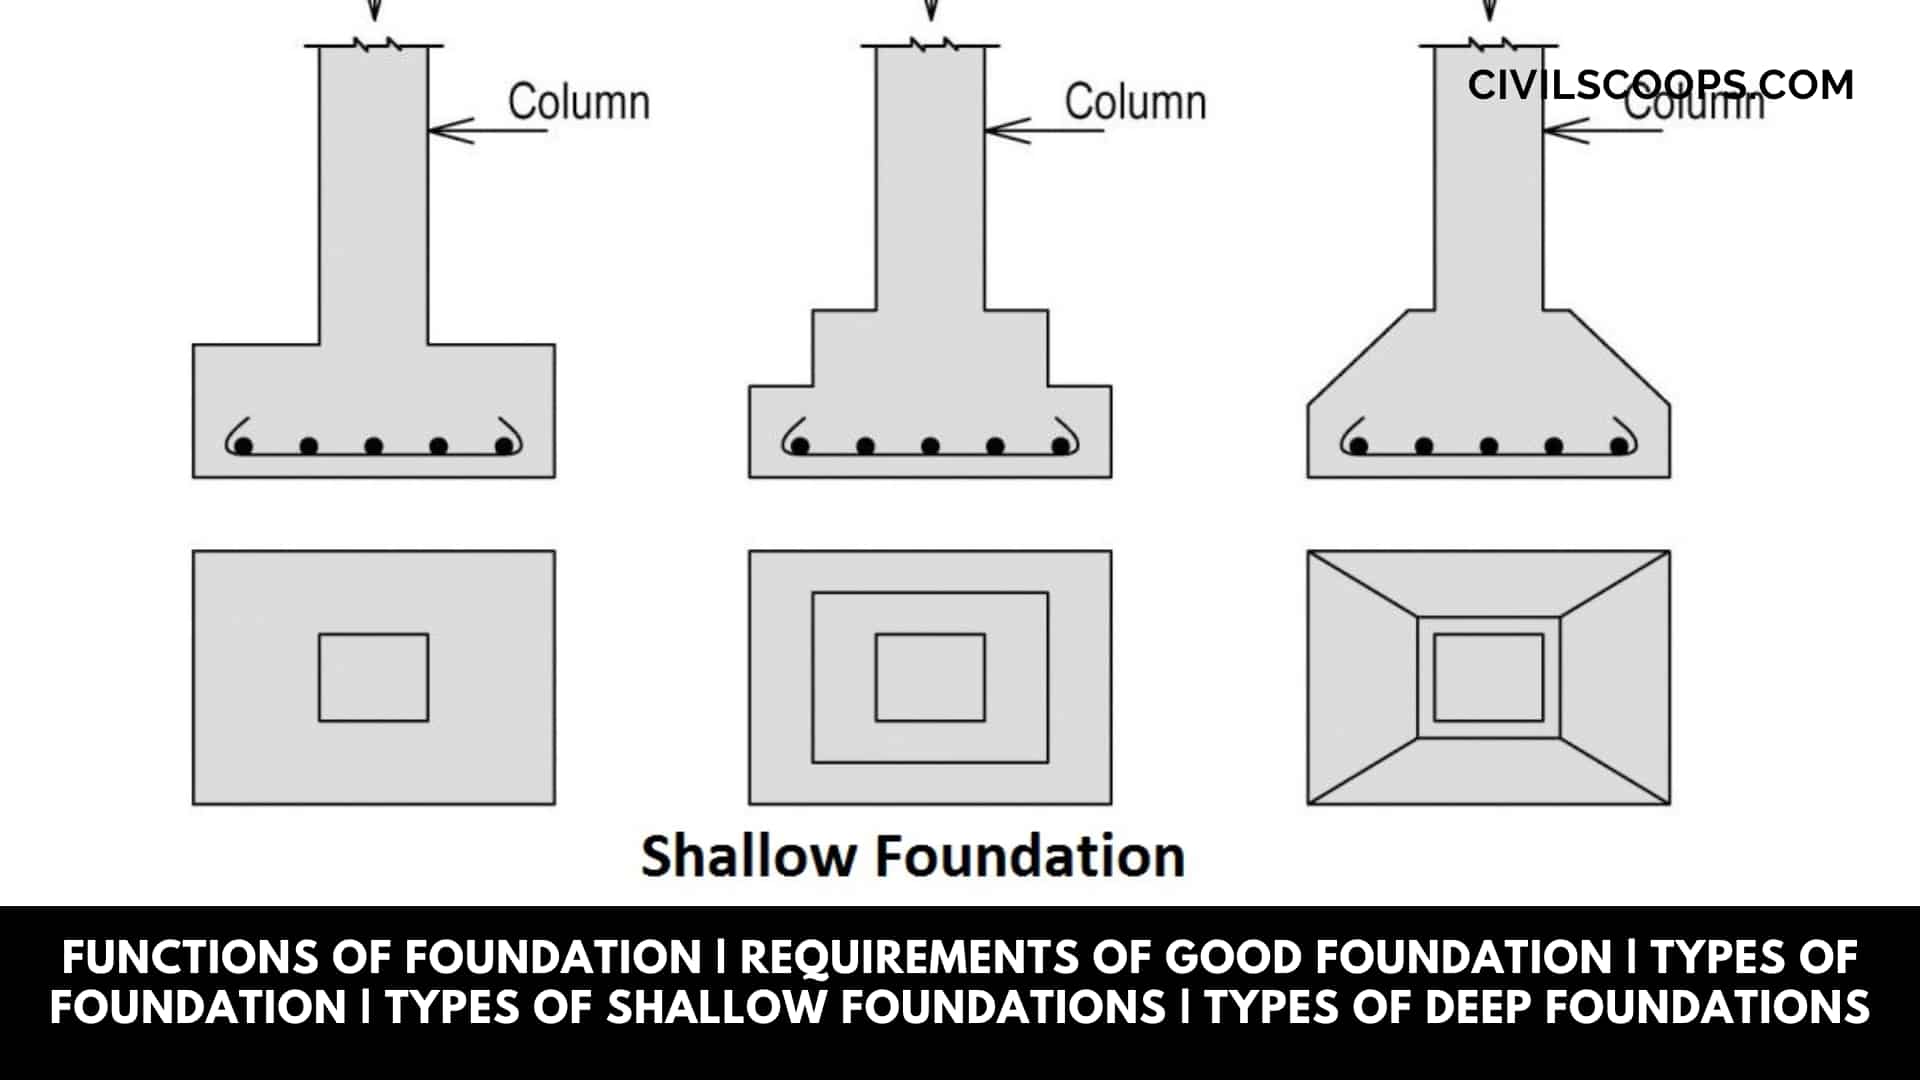 Functions of Foundation | Requirements of Good Foundation | Types of Foundation | Types of Shallow Foundations | Types of Deep Foundations 